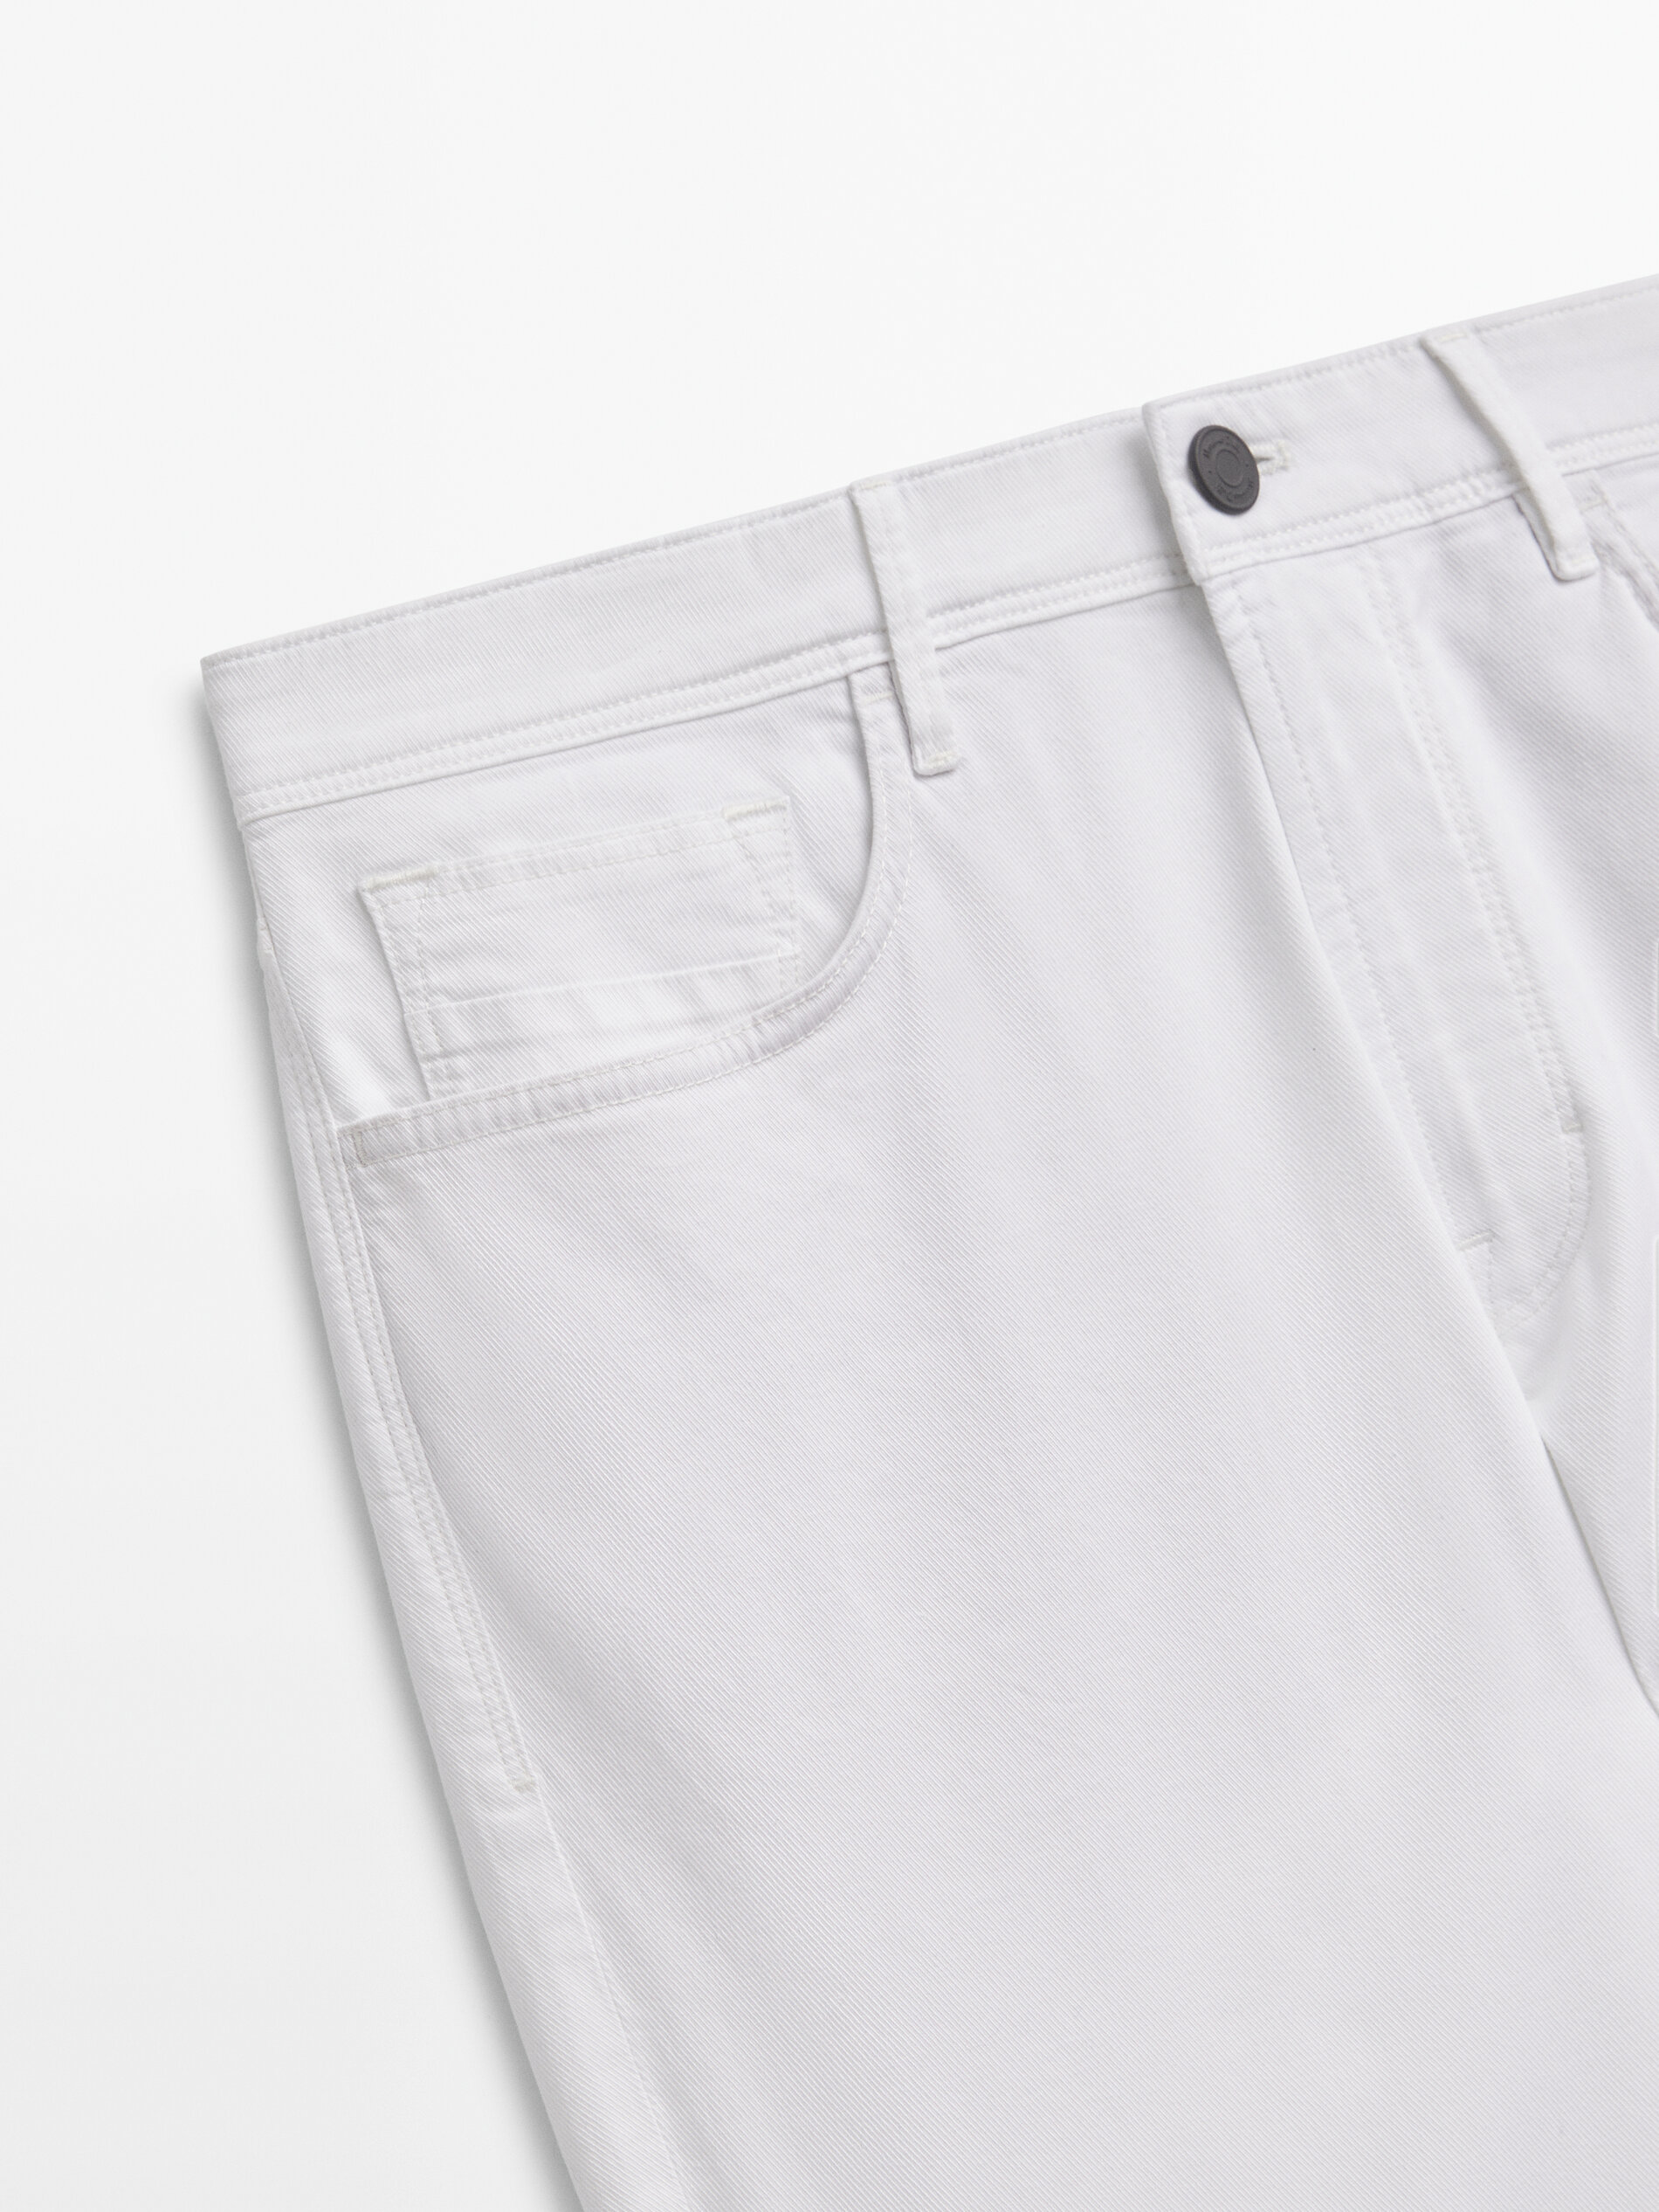 White Jeans for Men and Women  10 Latest Styles and Designs